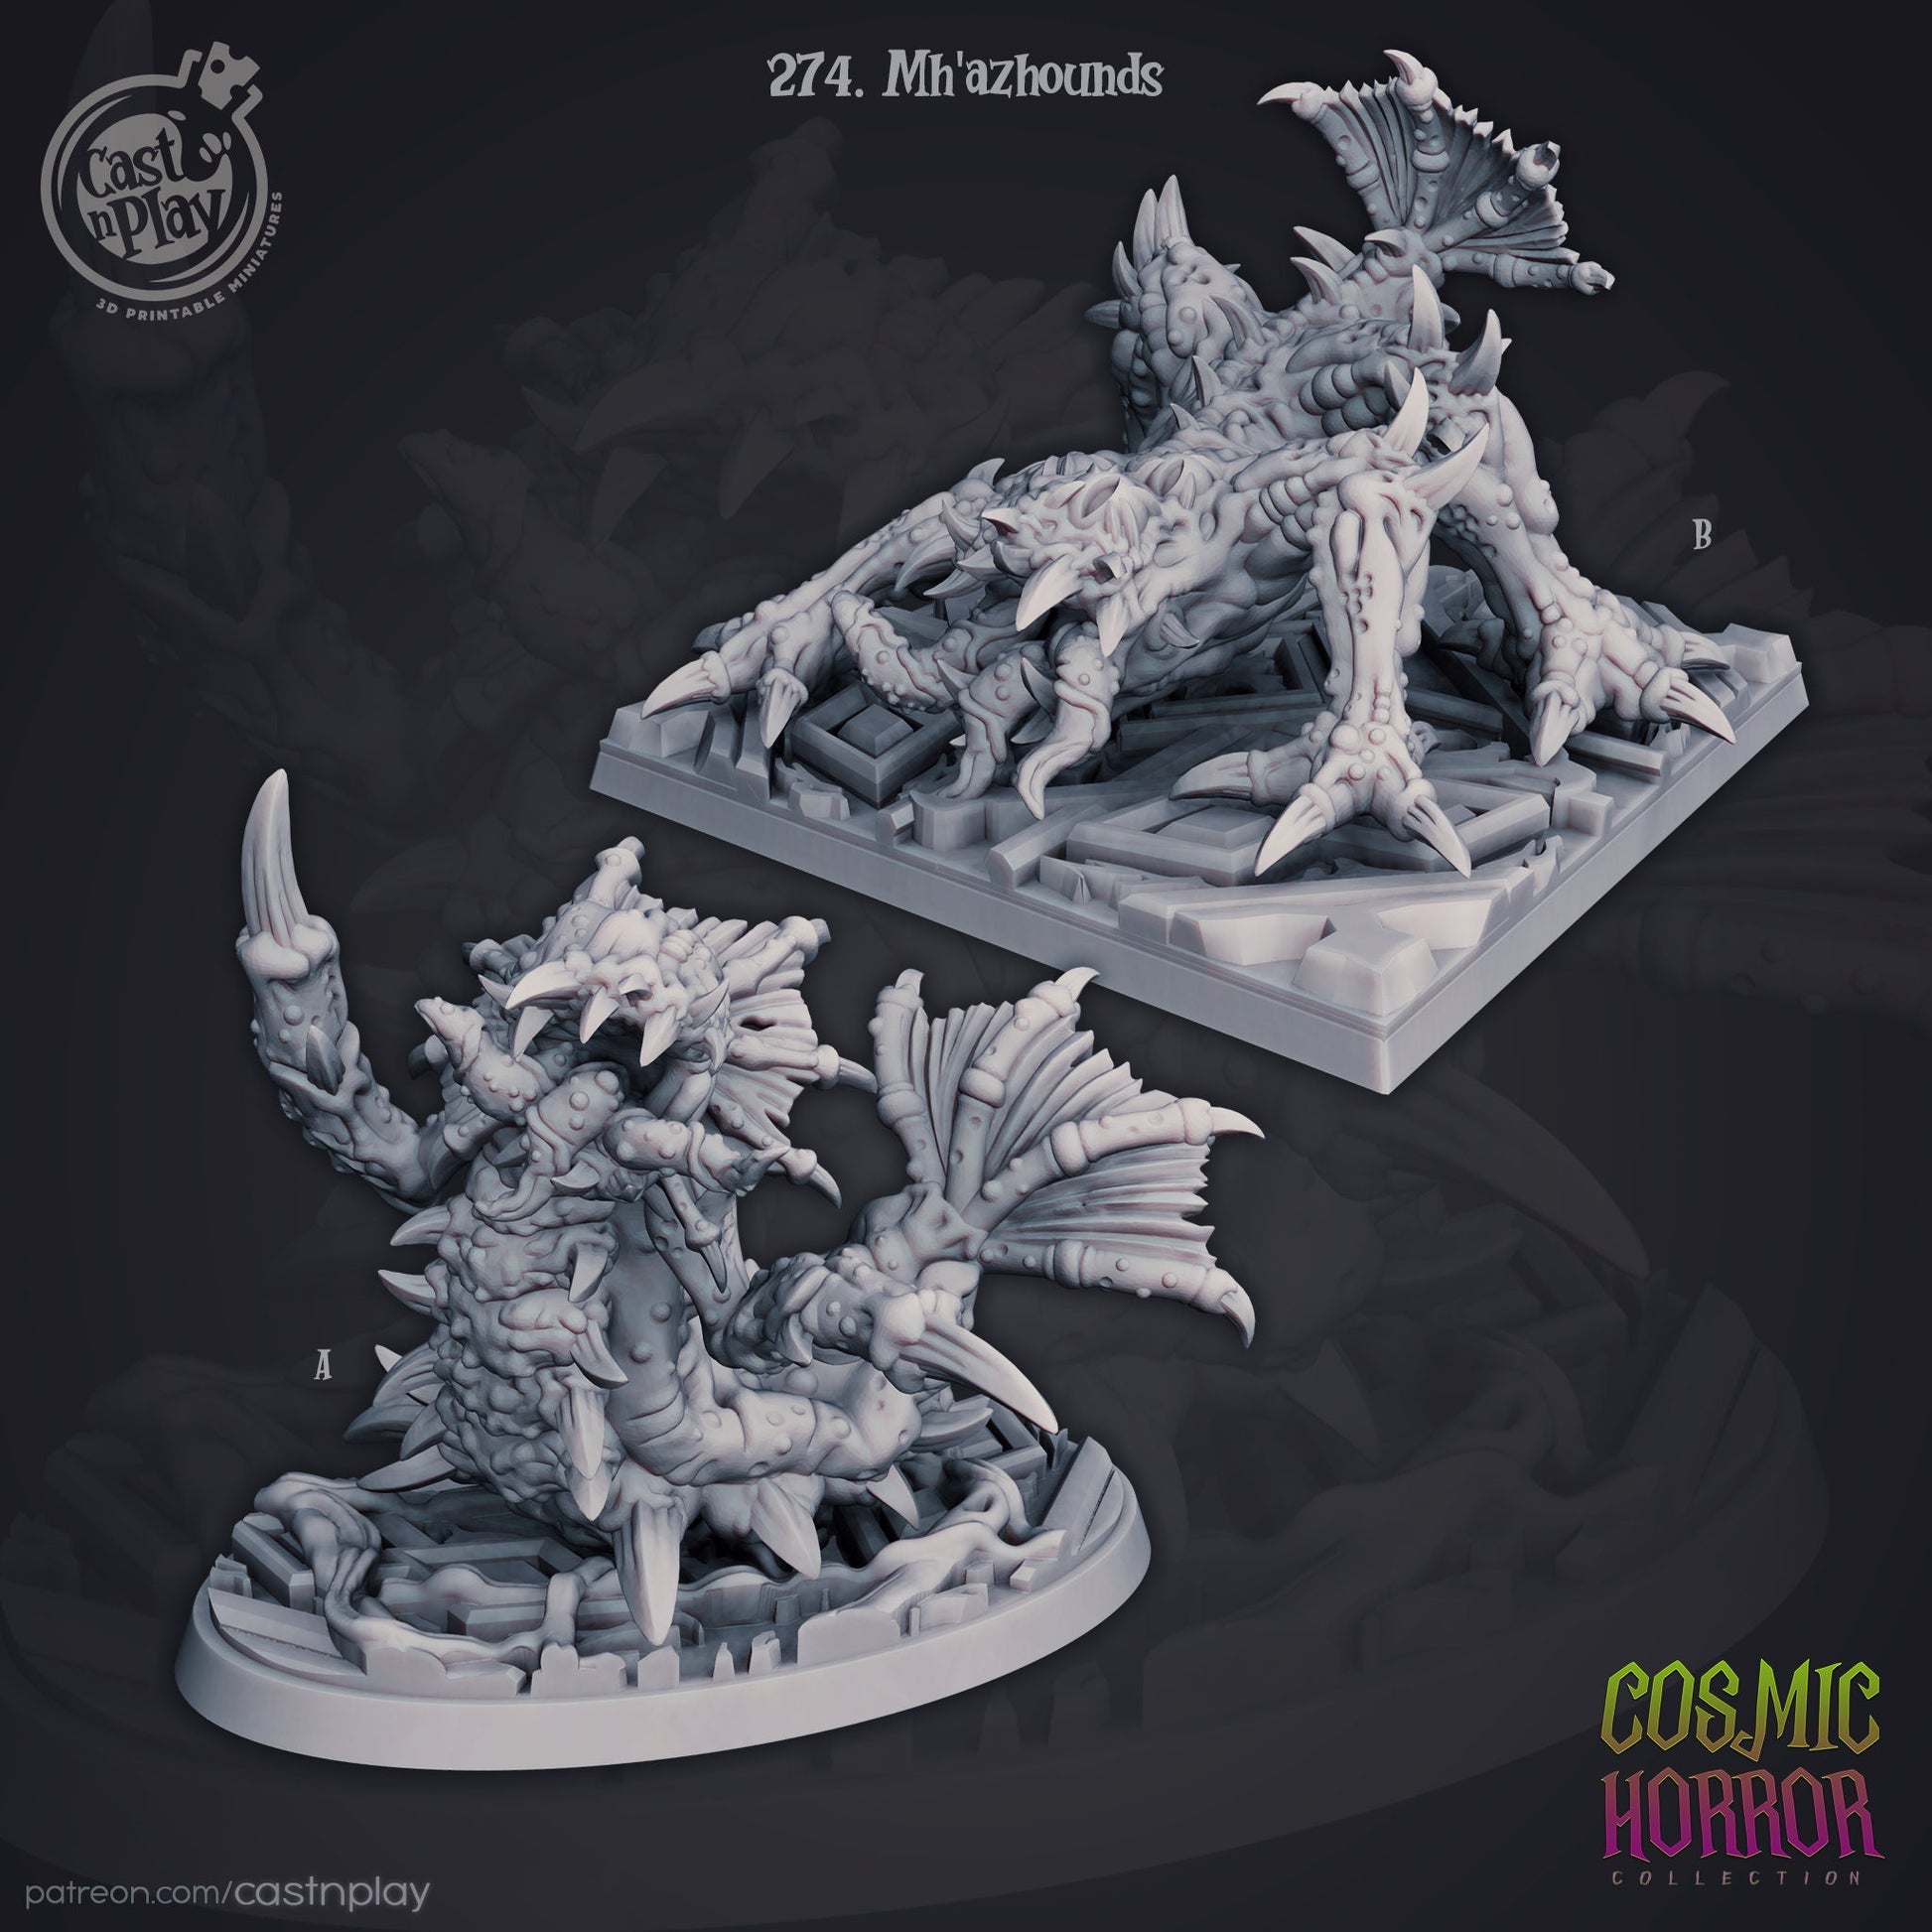 Mh'azhounds - Cast n Play Printed Miniature | Dungeons & Dragons | Pathfinder | Tabletop